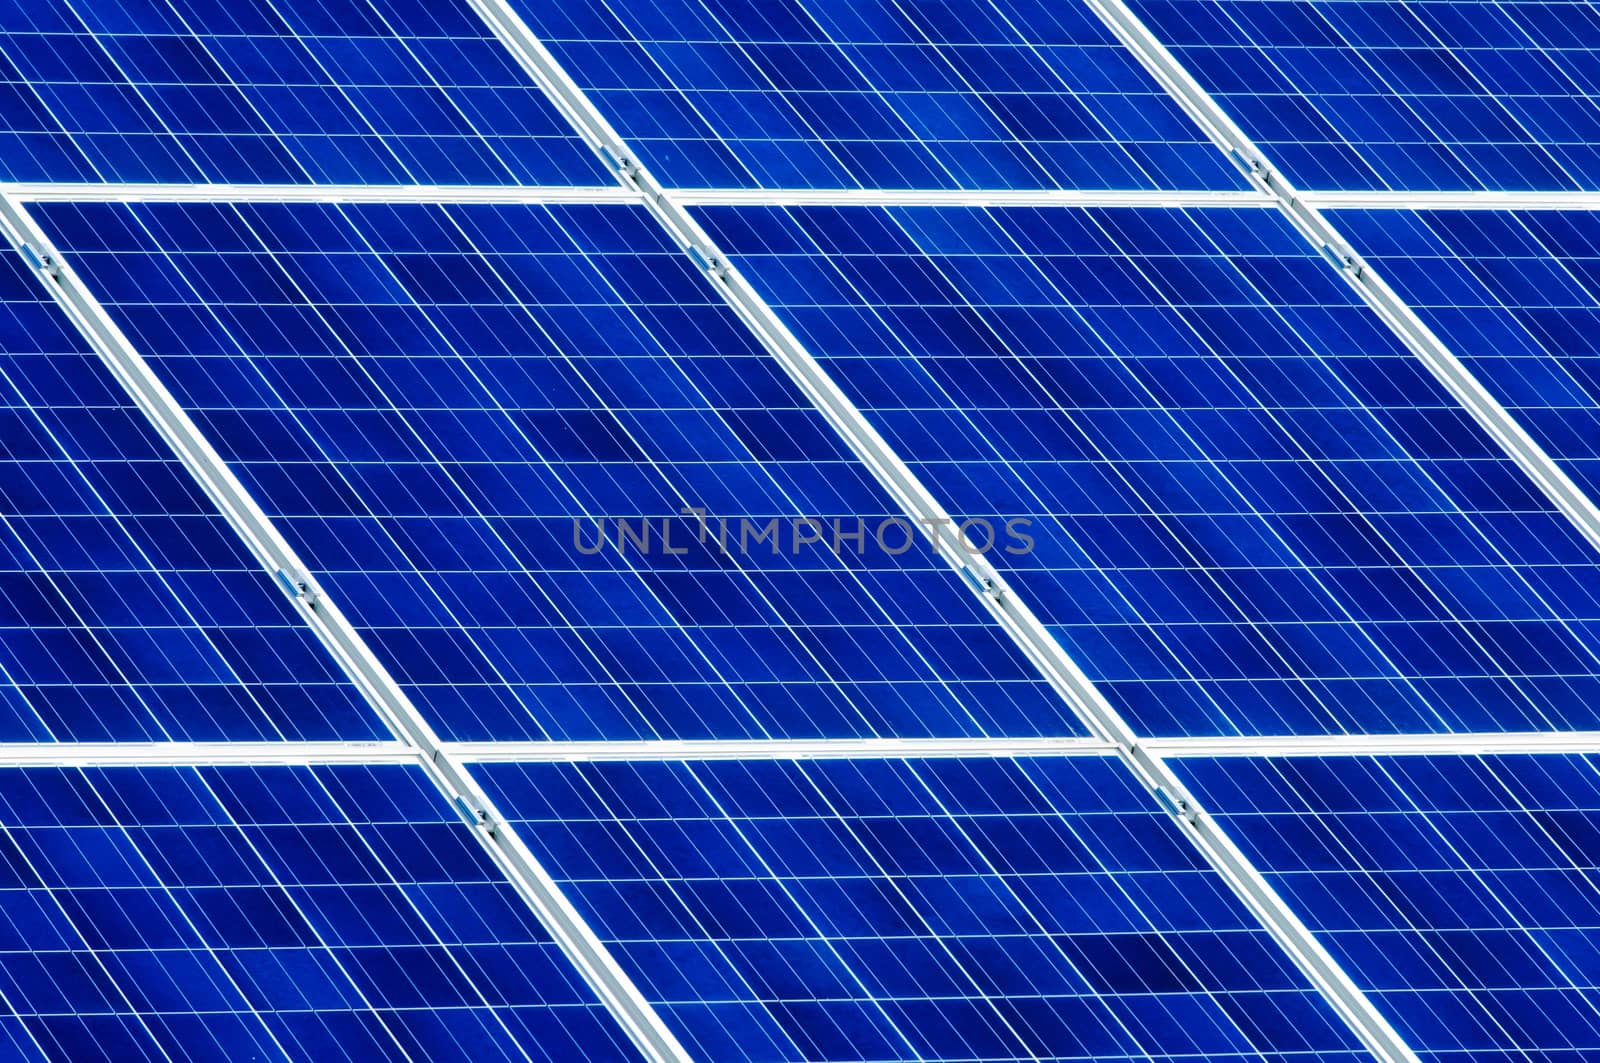 Photovoltaic solar cell panels as renewable energy source